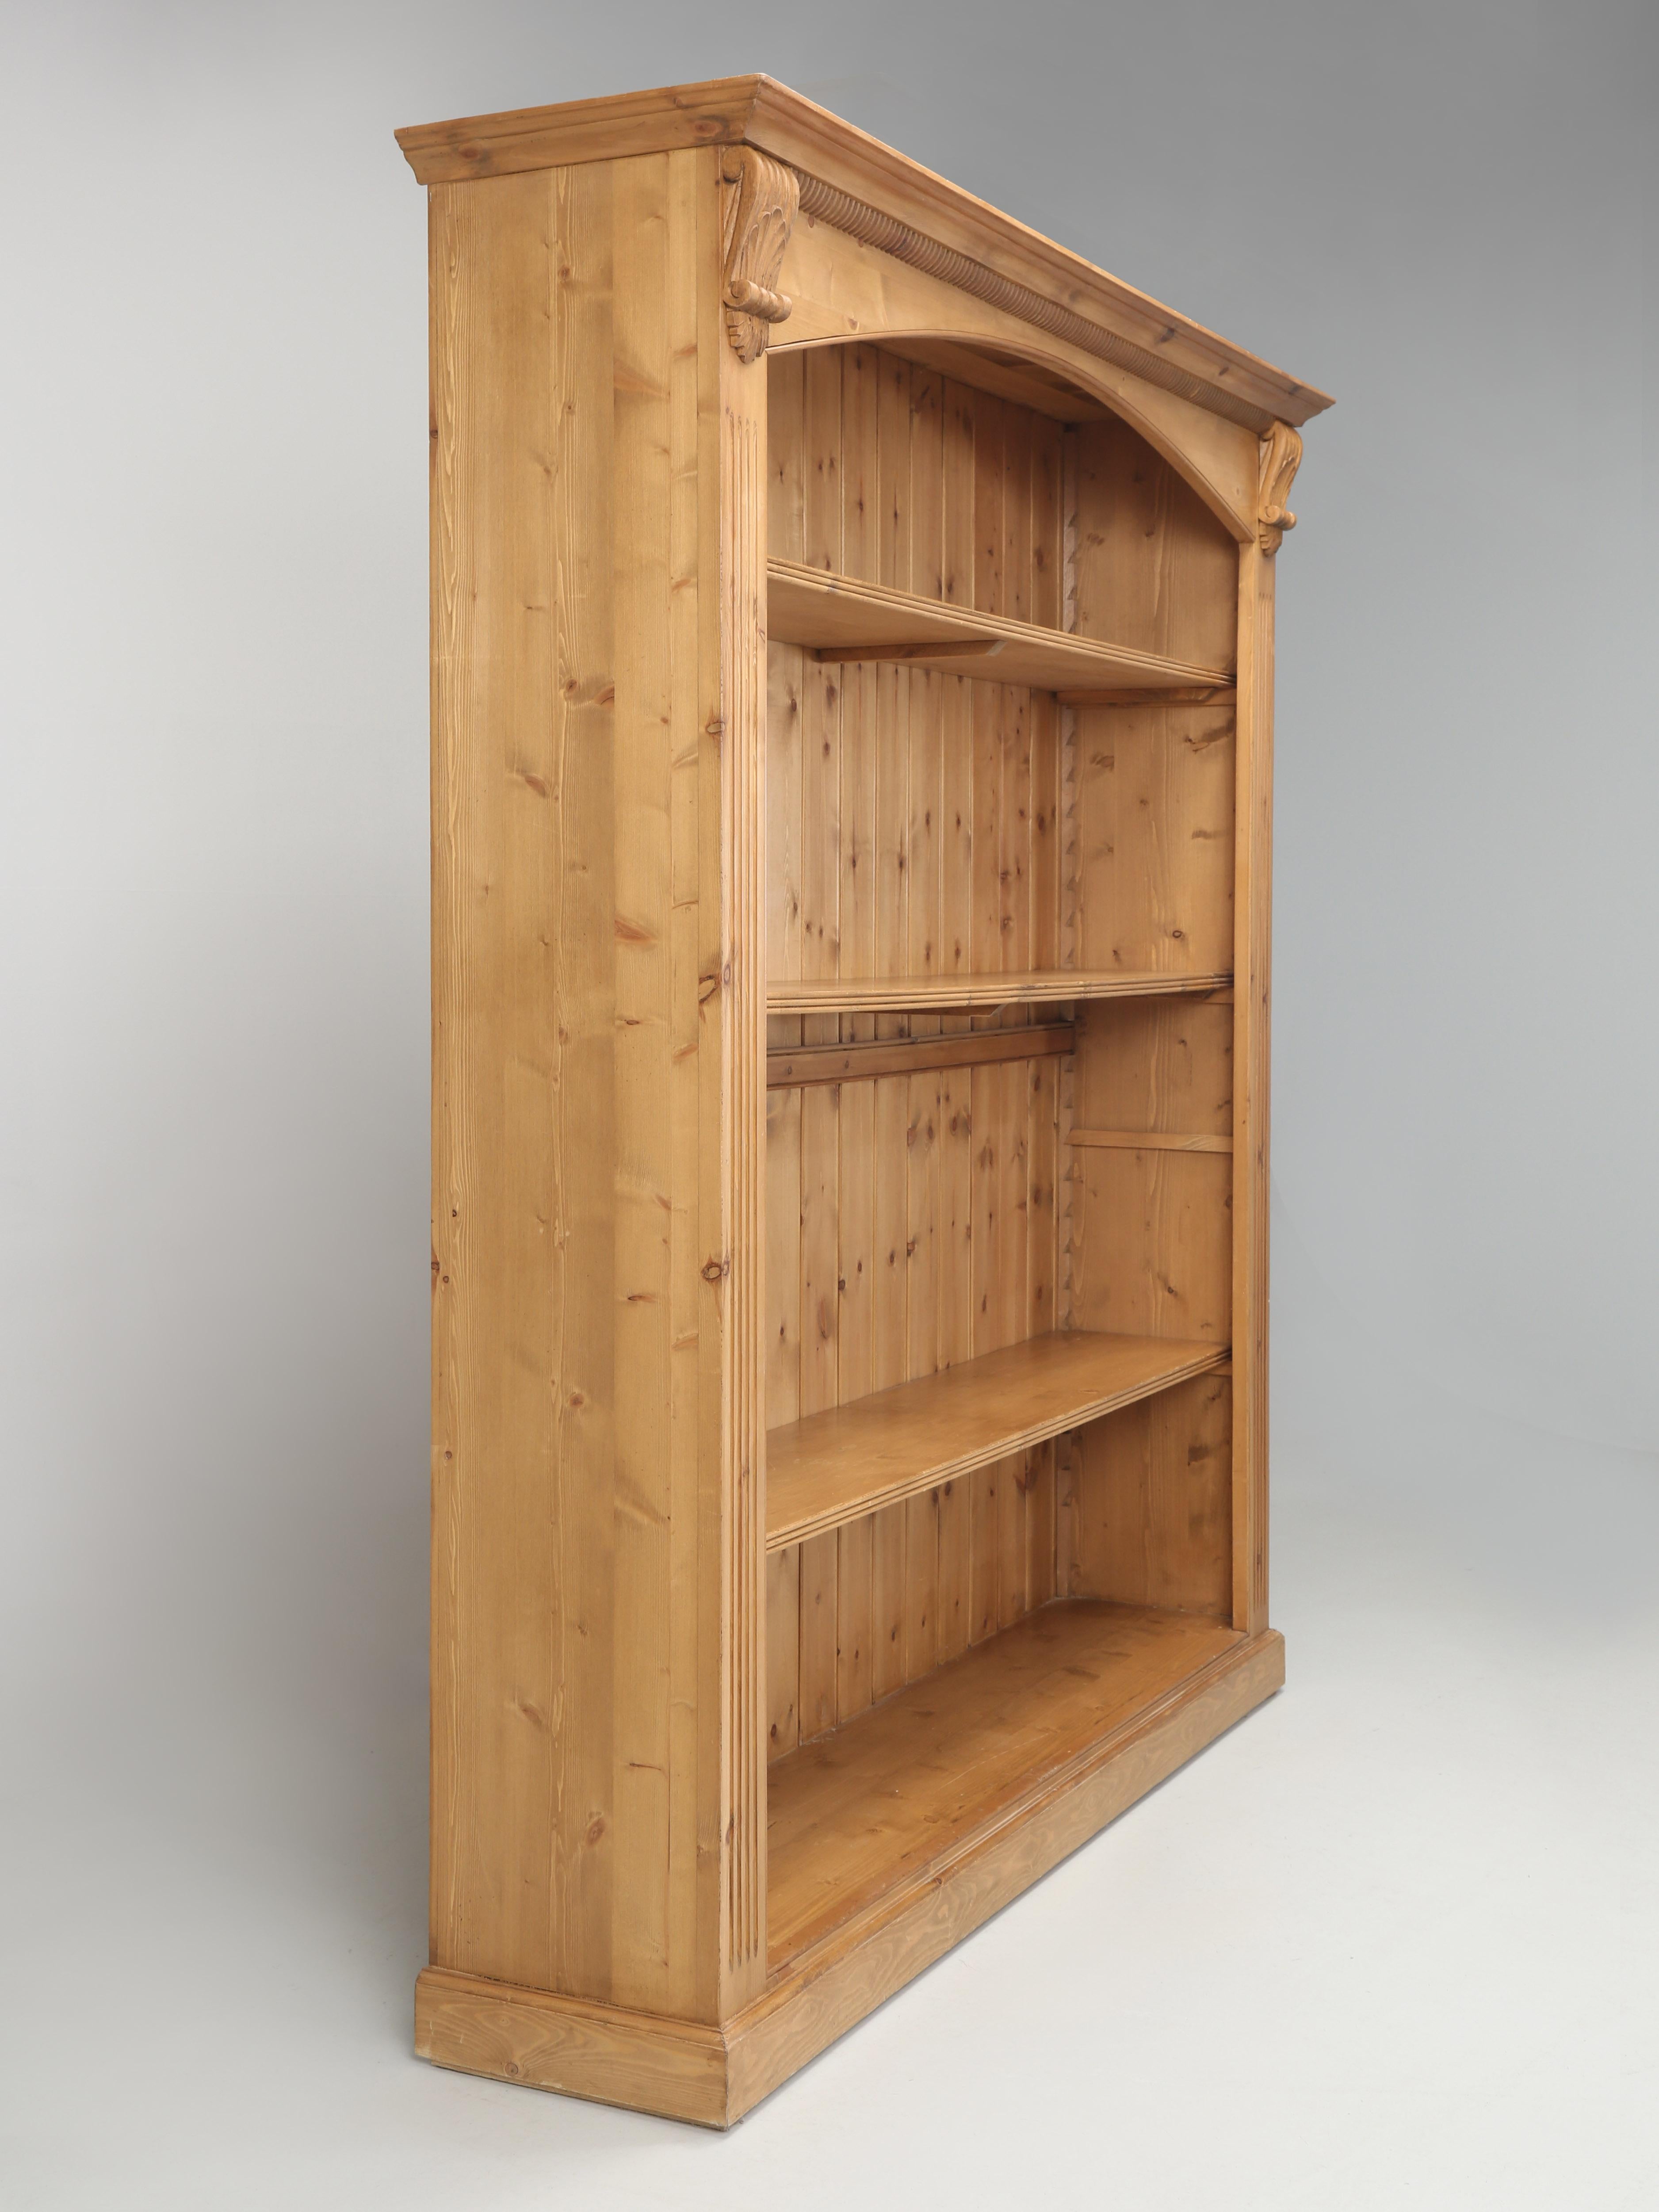 Hand-Crafted English Pine Country Bookcase Over 6 Feet Wide, Traditional Beeswax by Chrispyn For Sale